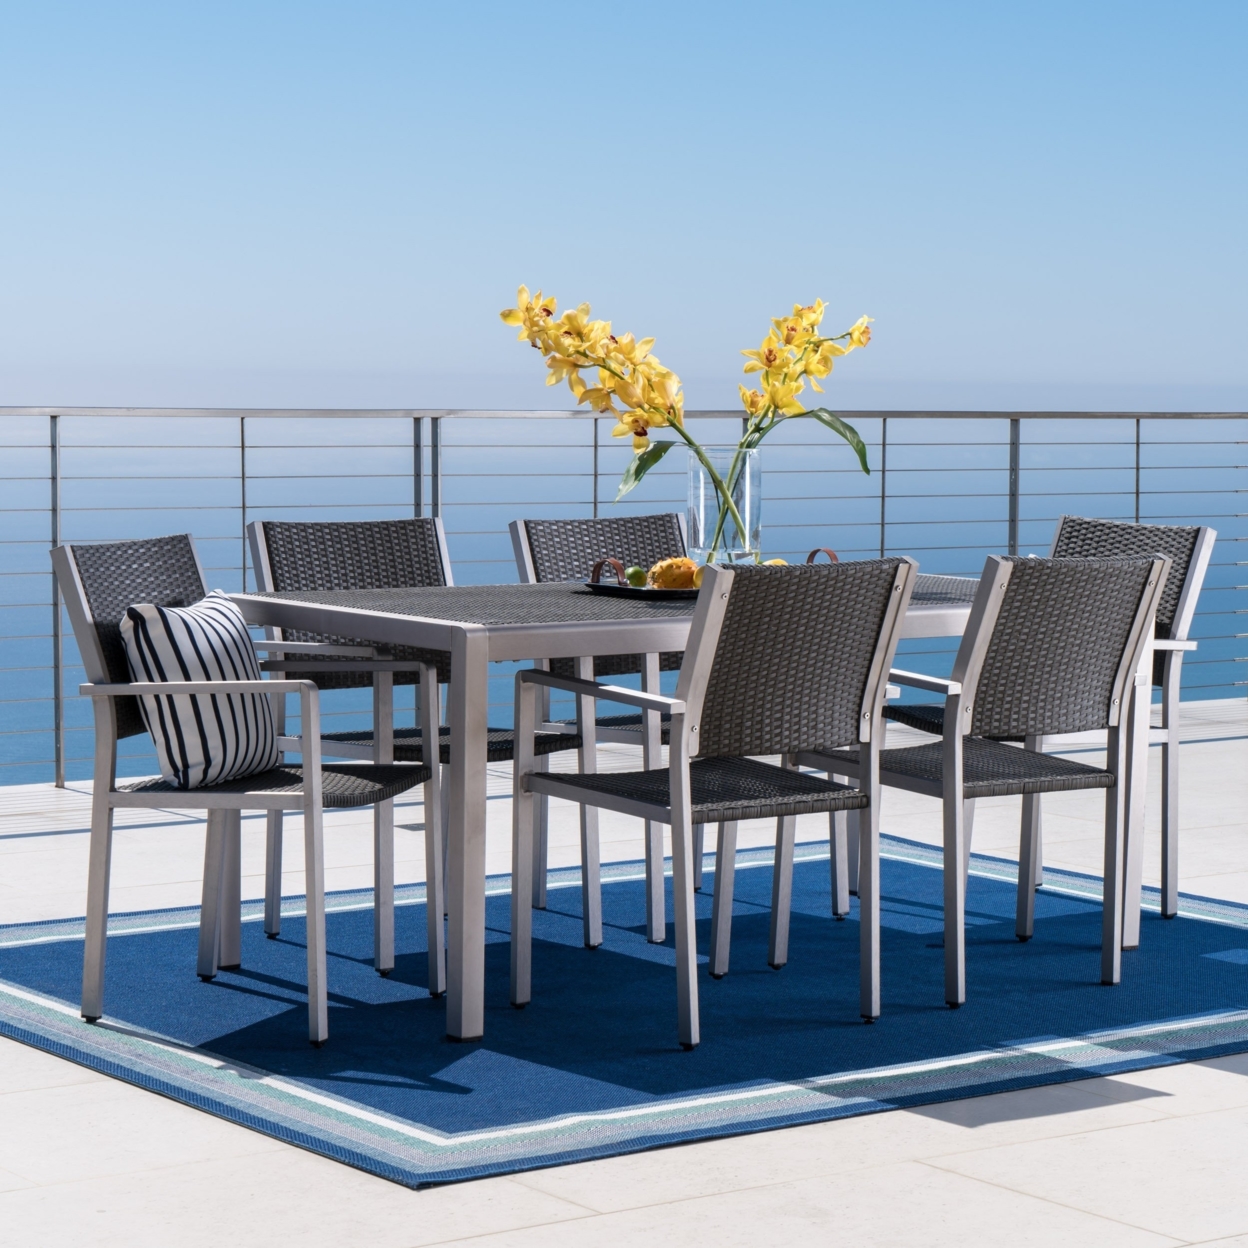 Coral Bay Outdoor 7Pc Aluminum Dining Set With Wicker Top